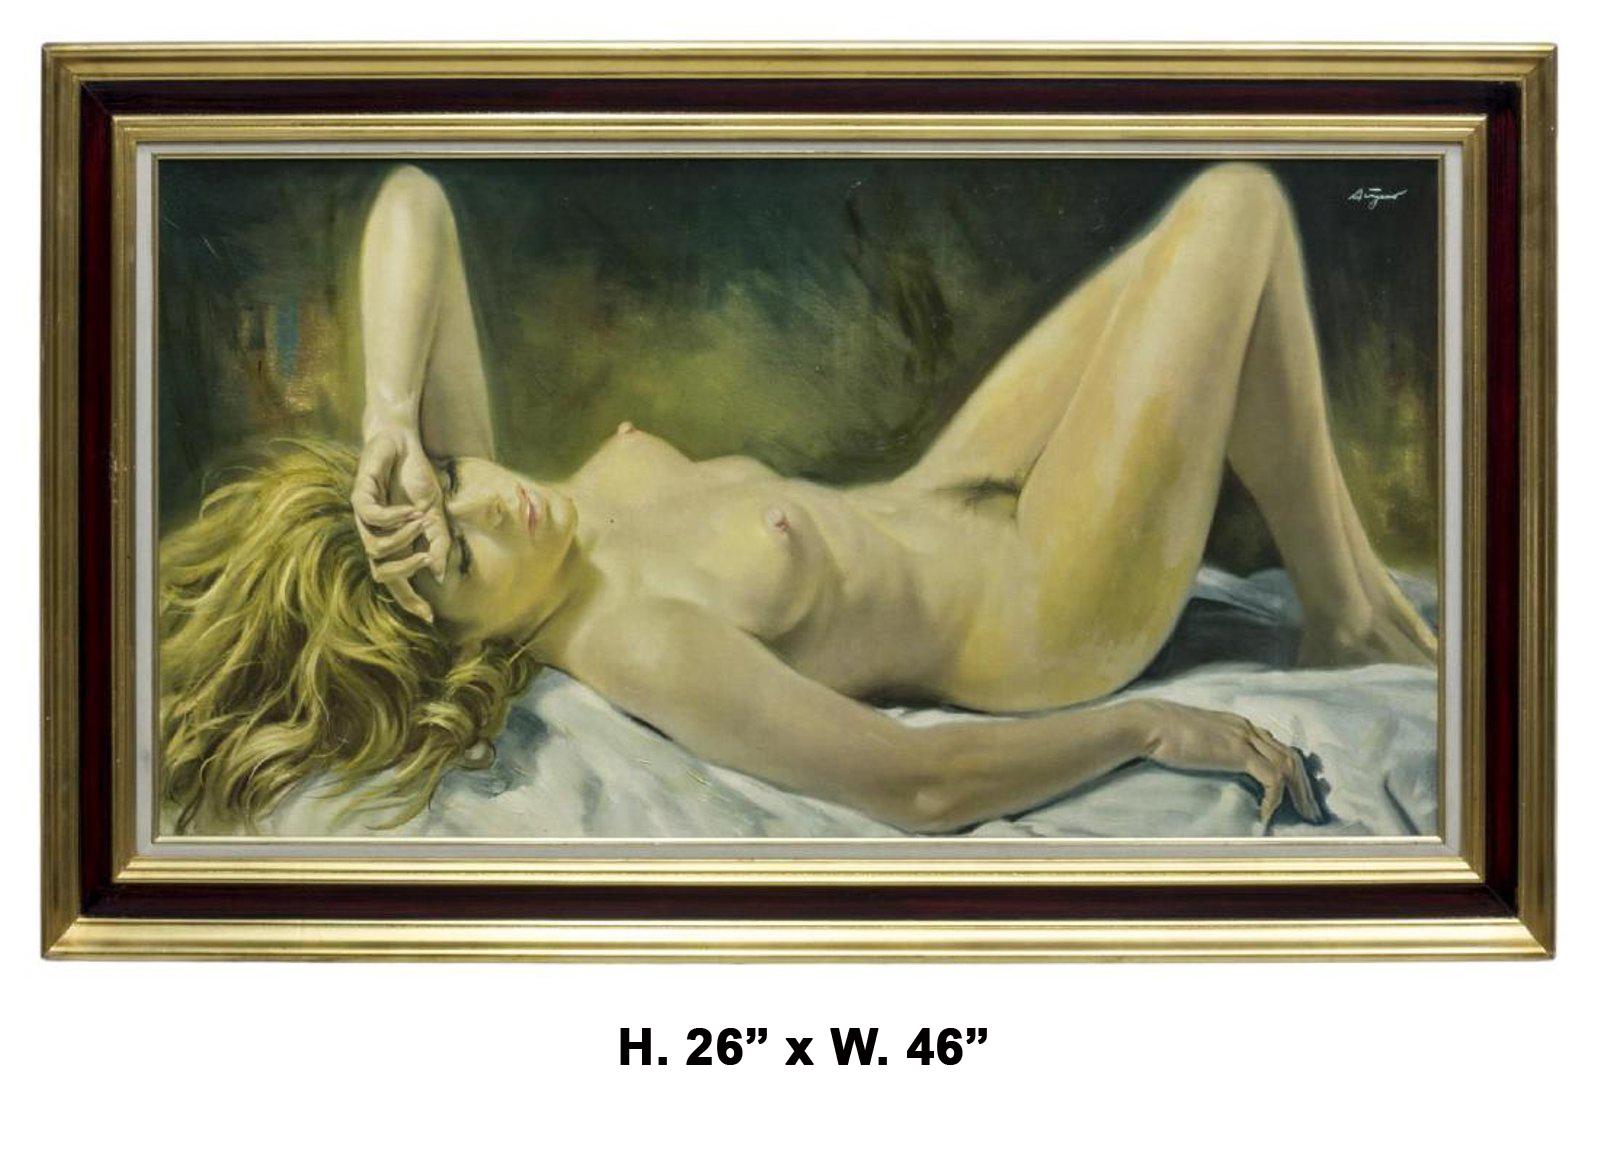 Beautiful oil on canvas of reclining blonde nude on a white bed sheet. Framed.
Signed (see attached photo).
20th century. 

Painting dimensions: H. 20